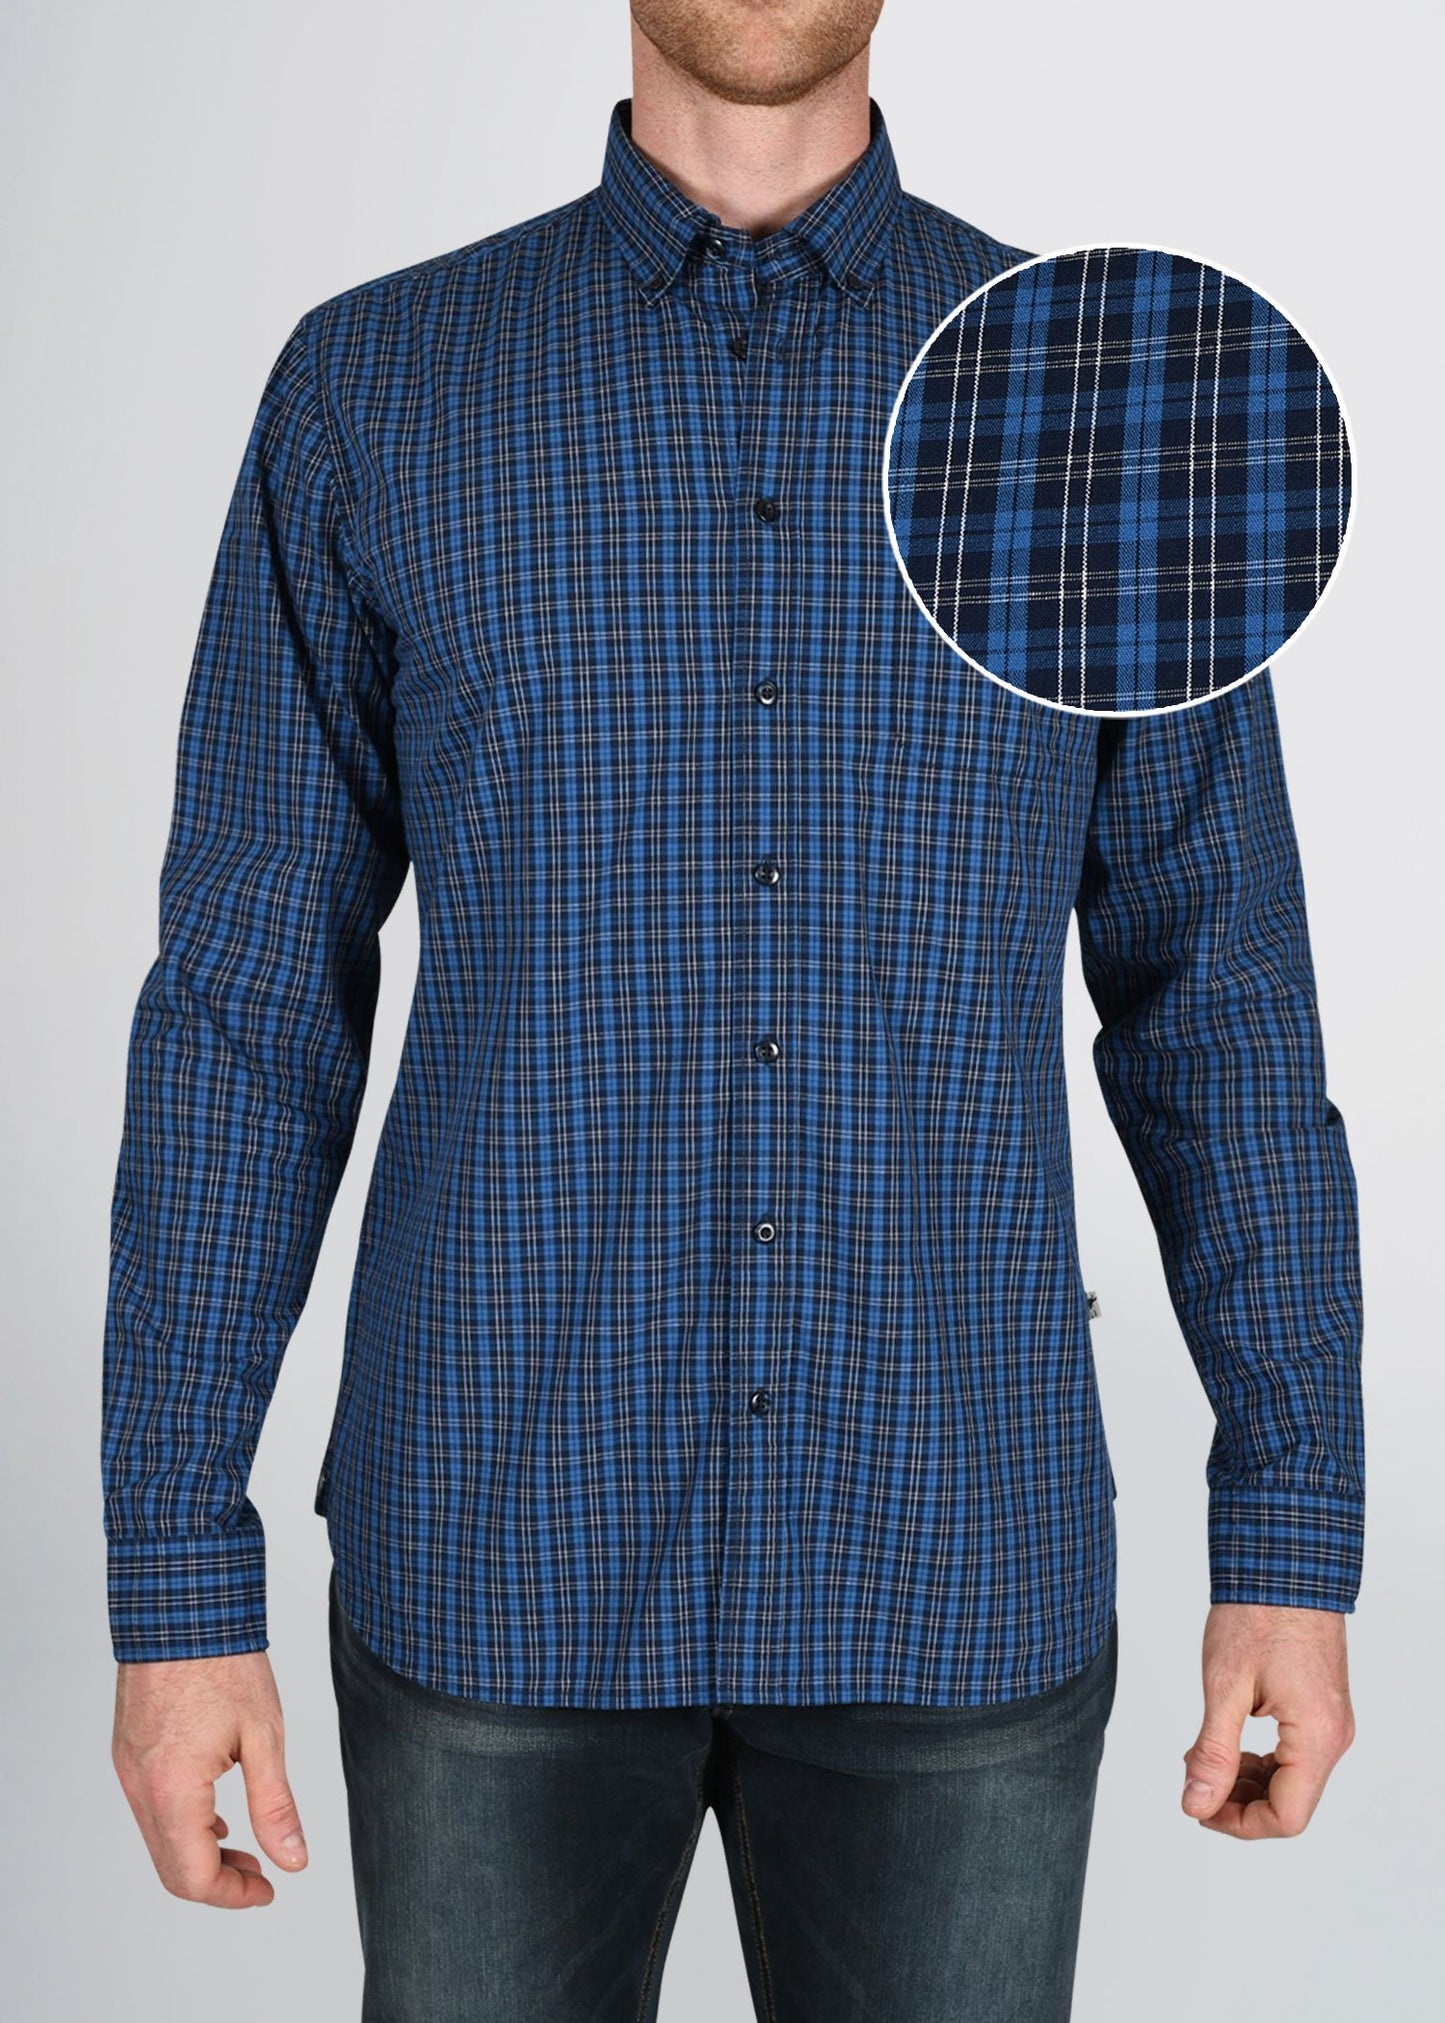 american-tall-mens-soft-wash-blue-windowpane-frontswatch